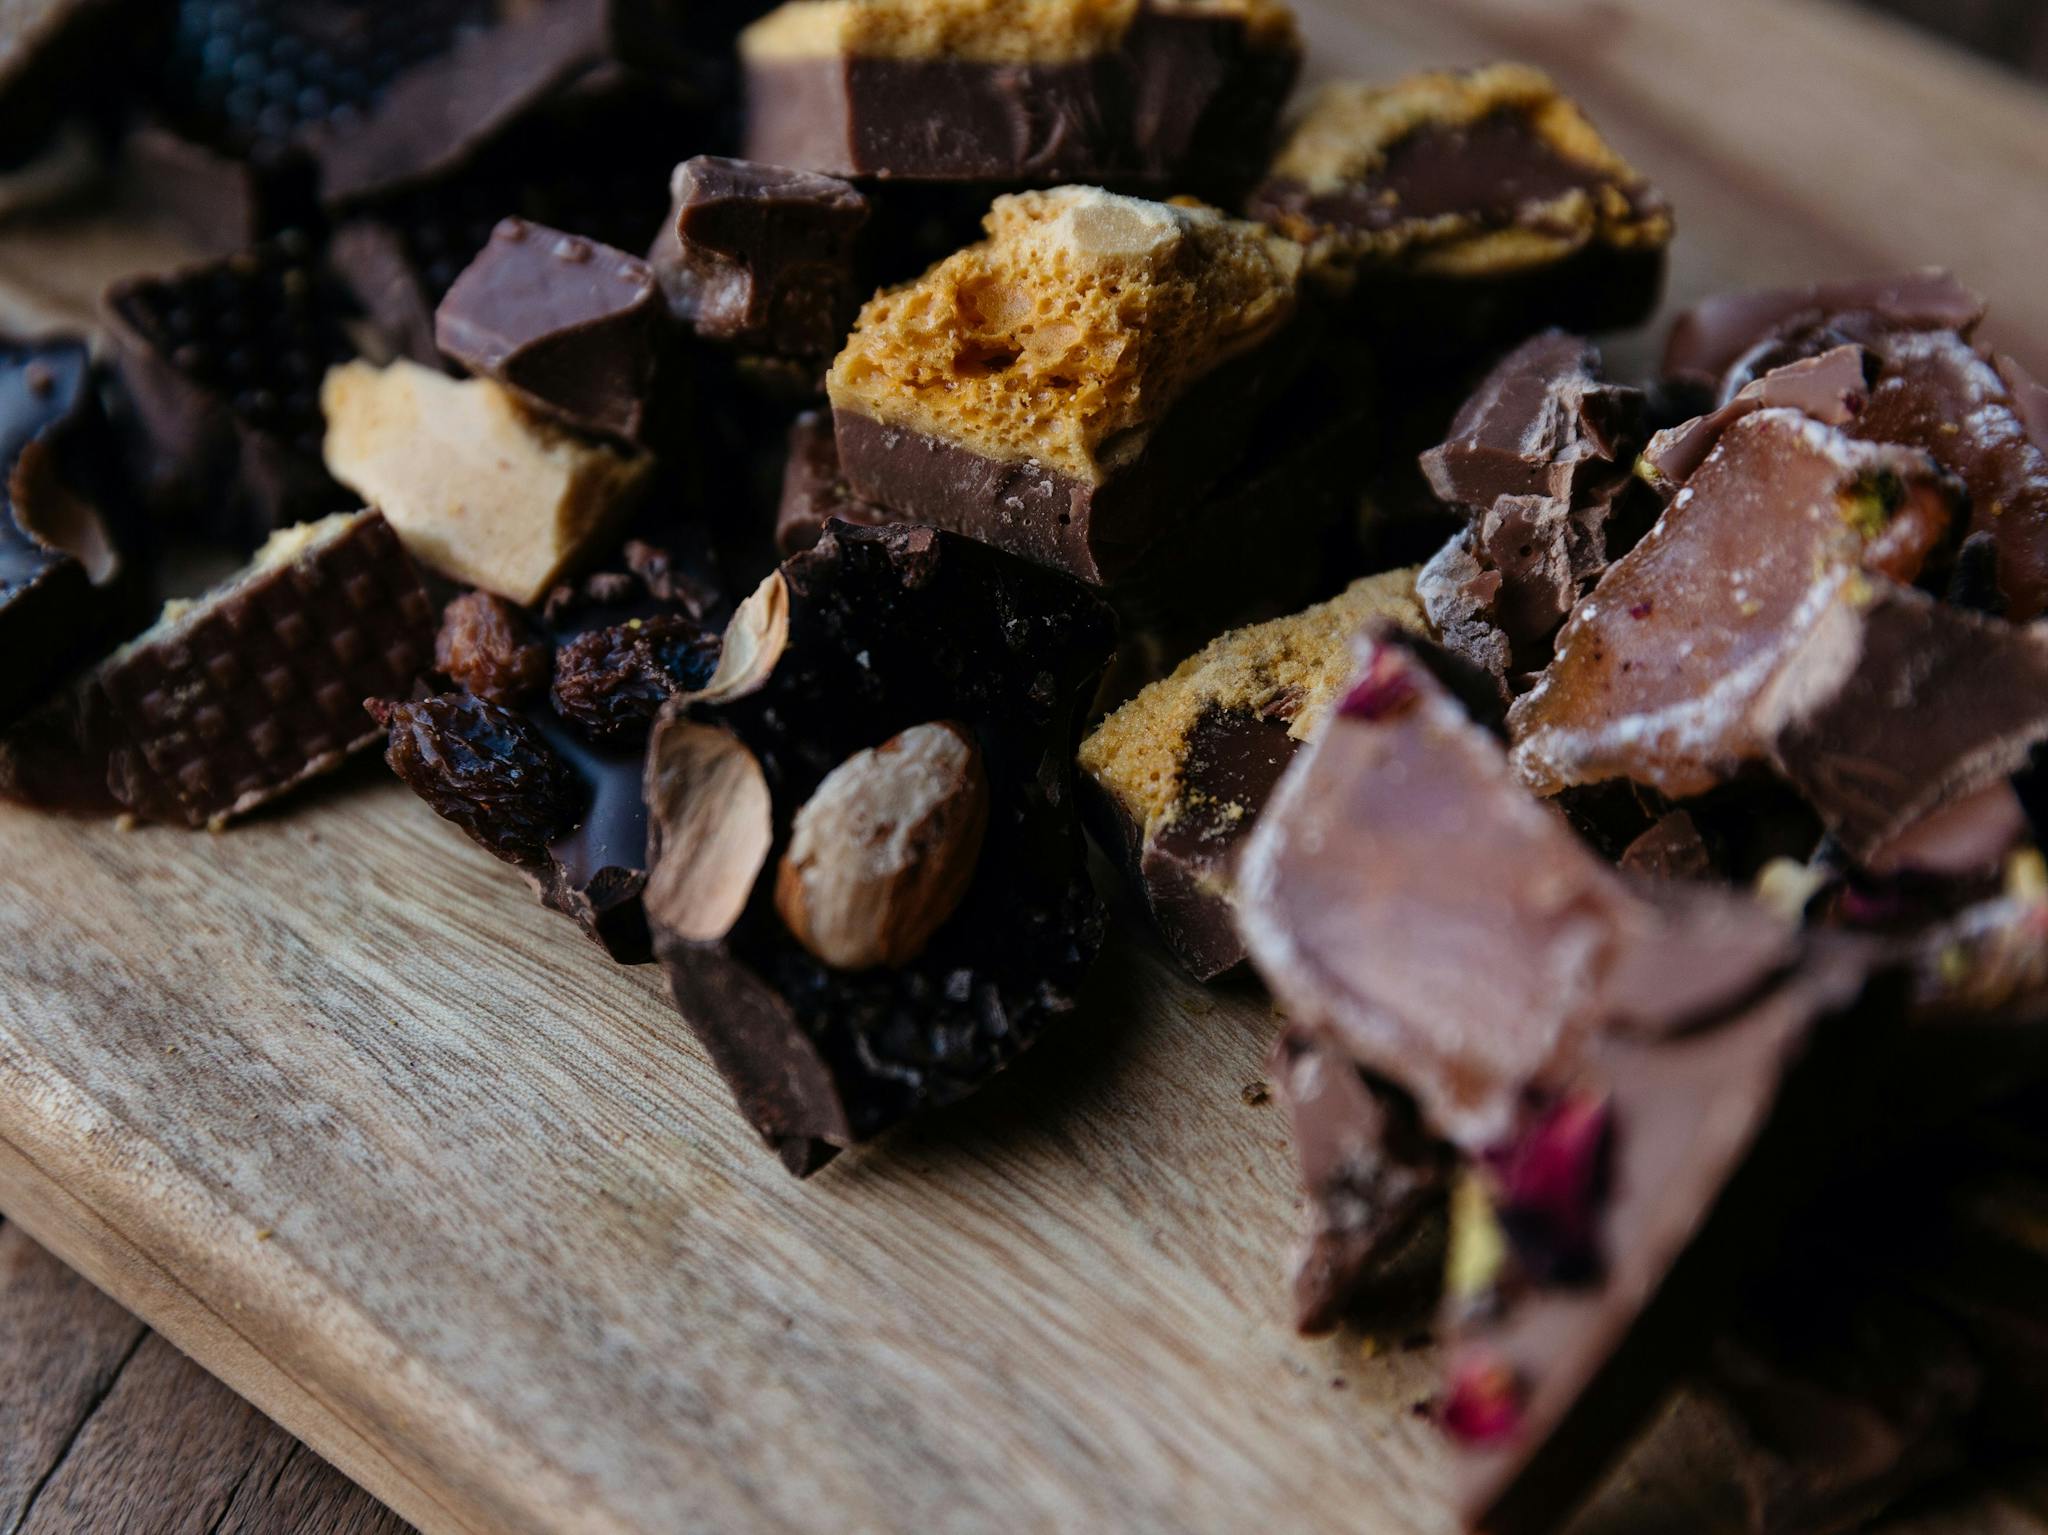 A chocolate platter from Four Winds Chocolate in Willunga